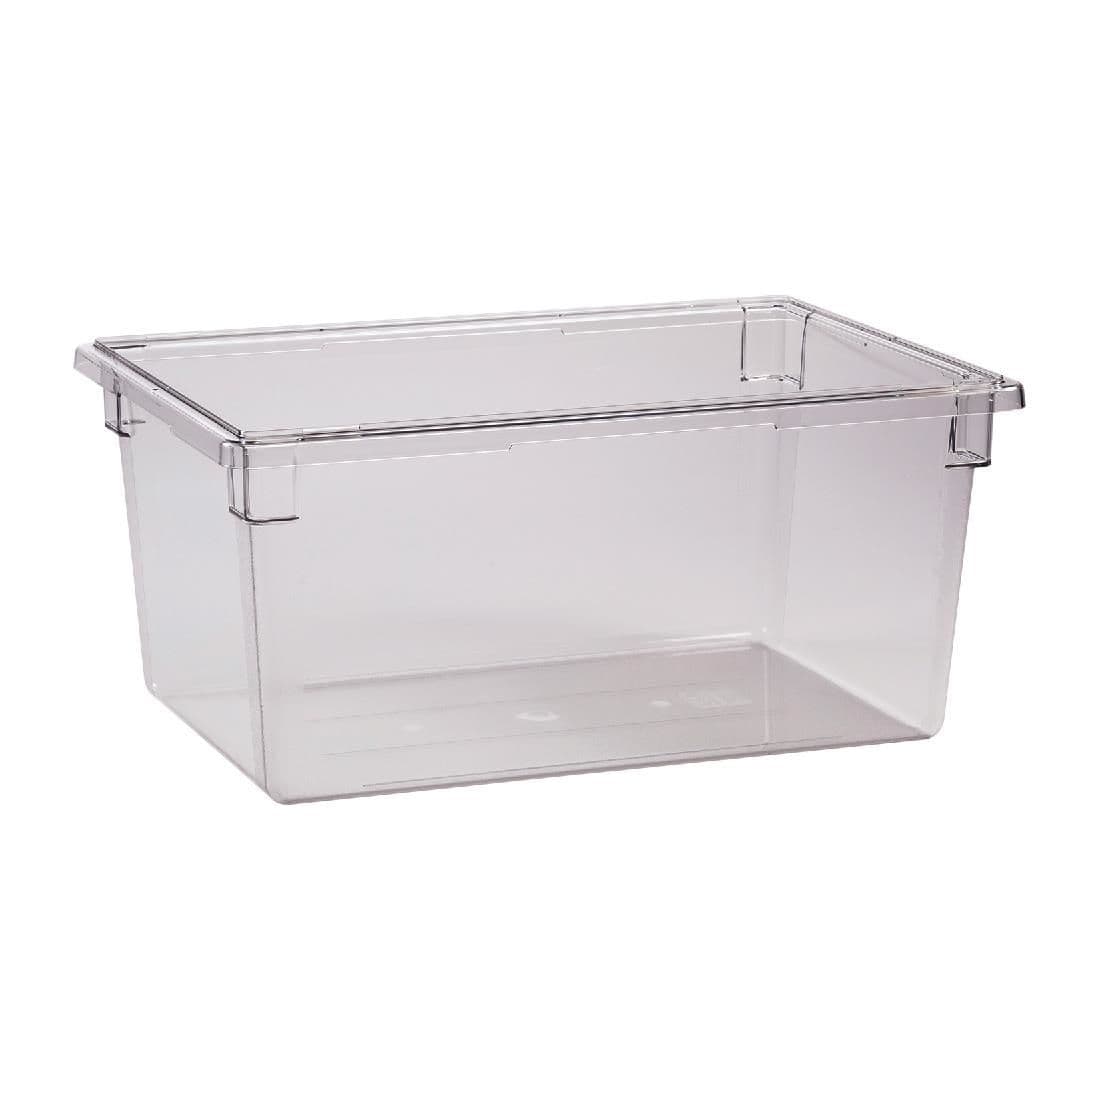 FE735 Cambro Polycarbonate Food Storage Box 64Ltr JD Catering Equipment Solutions Ltd